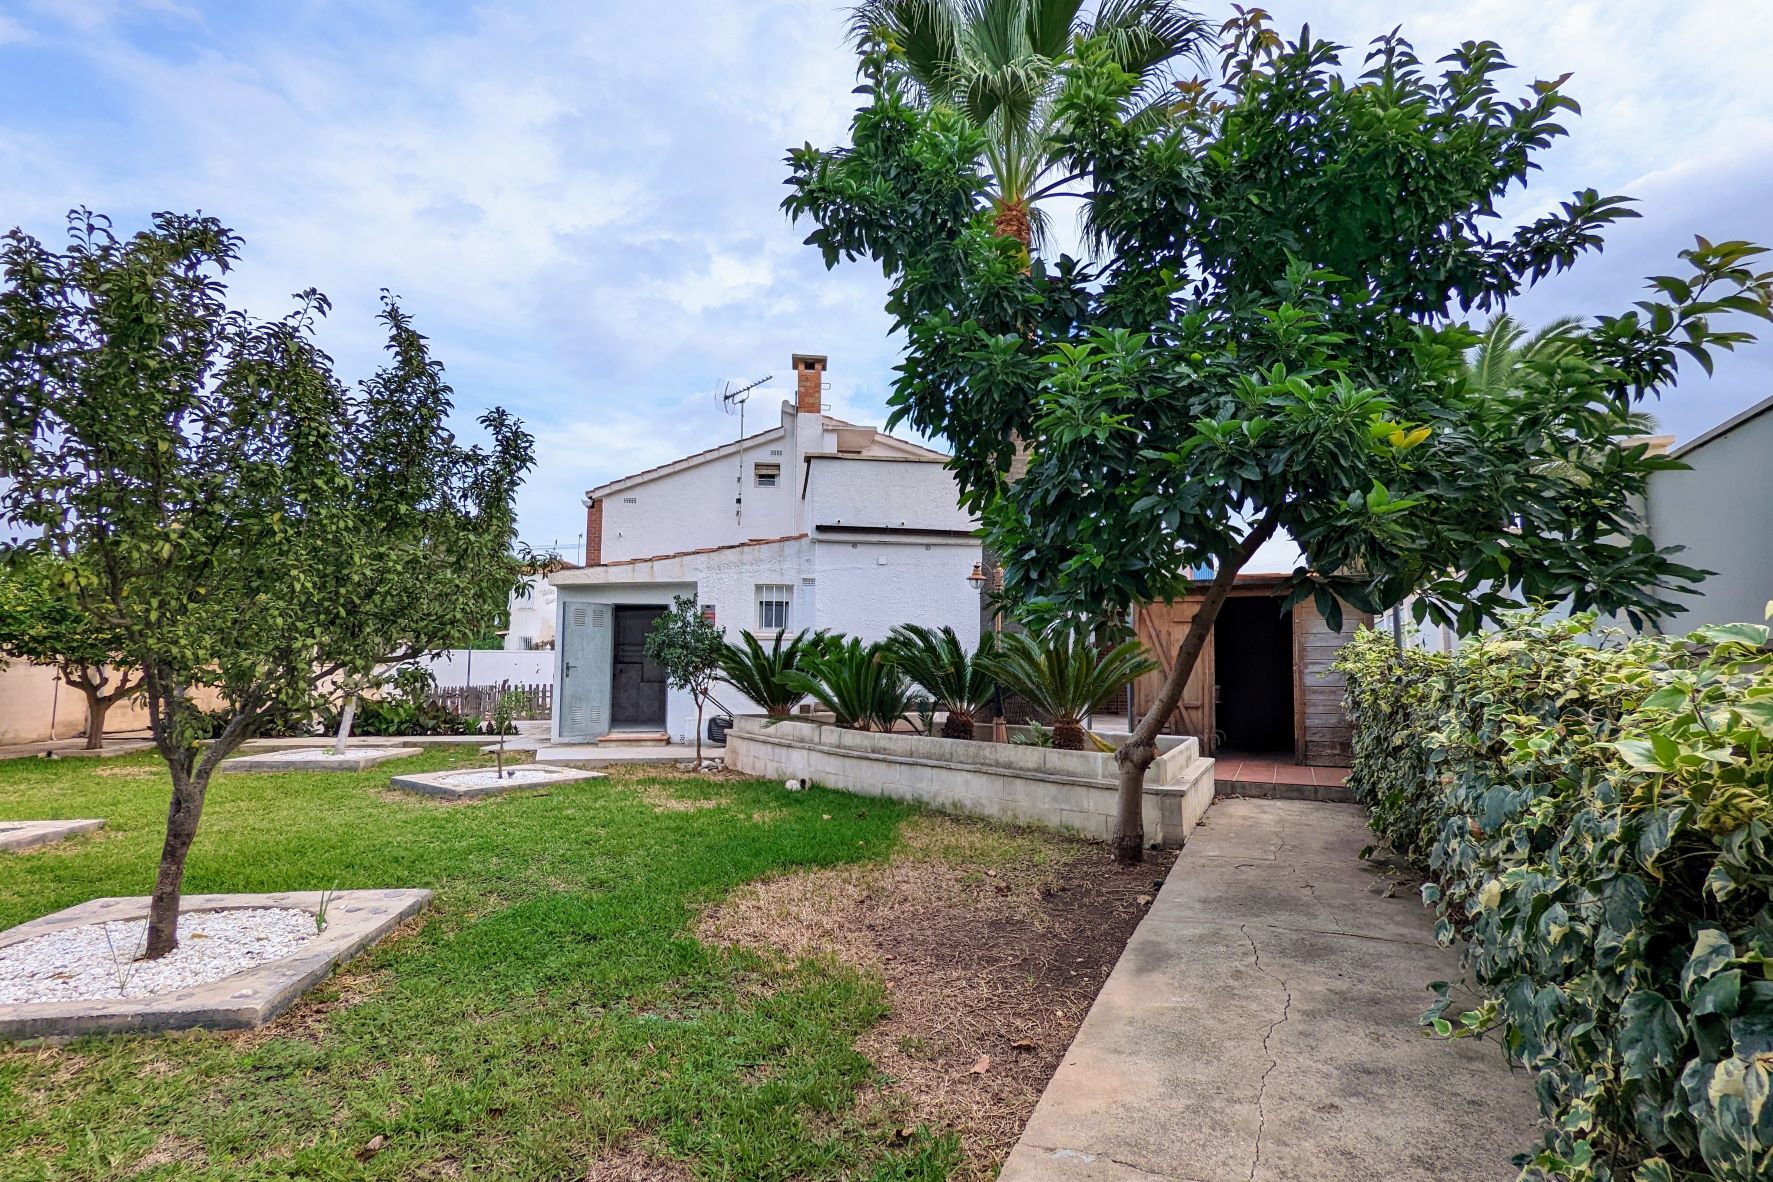 Great villa for sale in Els Poblets. This spacious house has plenty of space to have